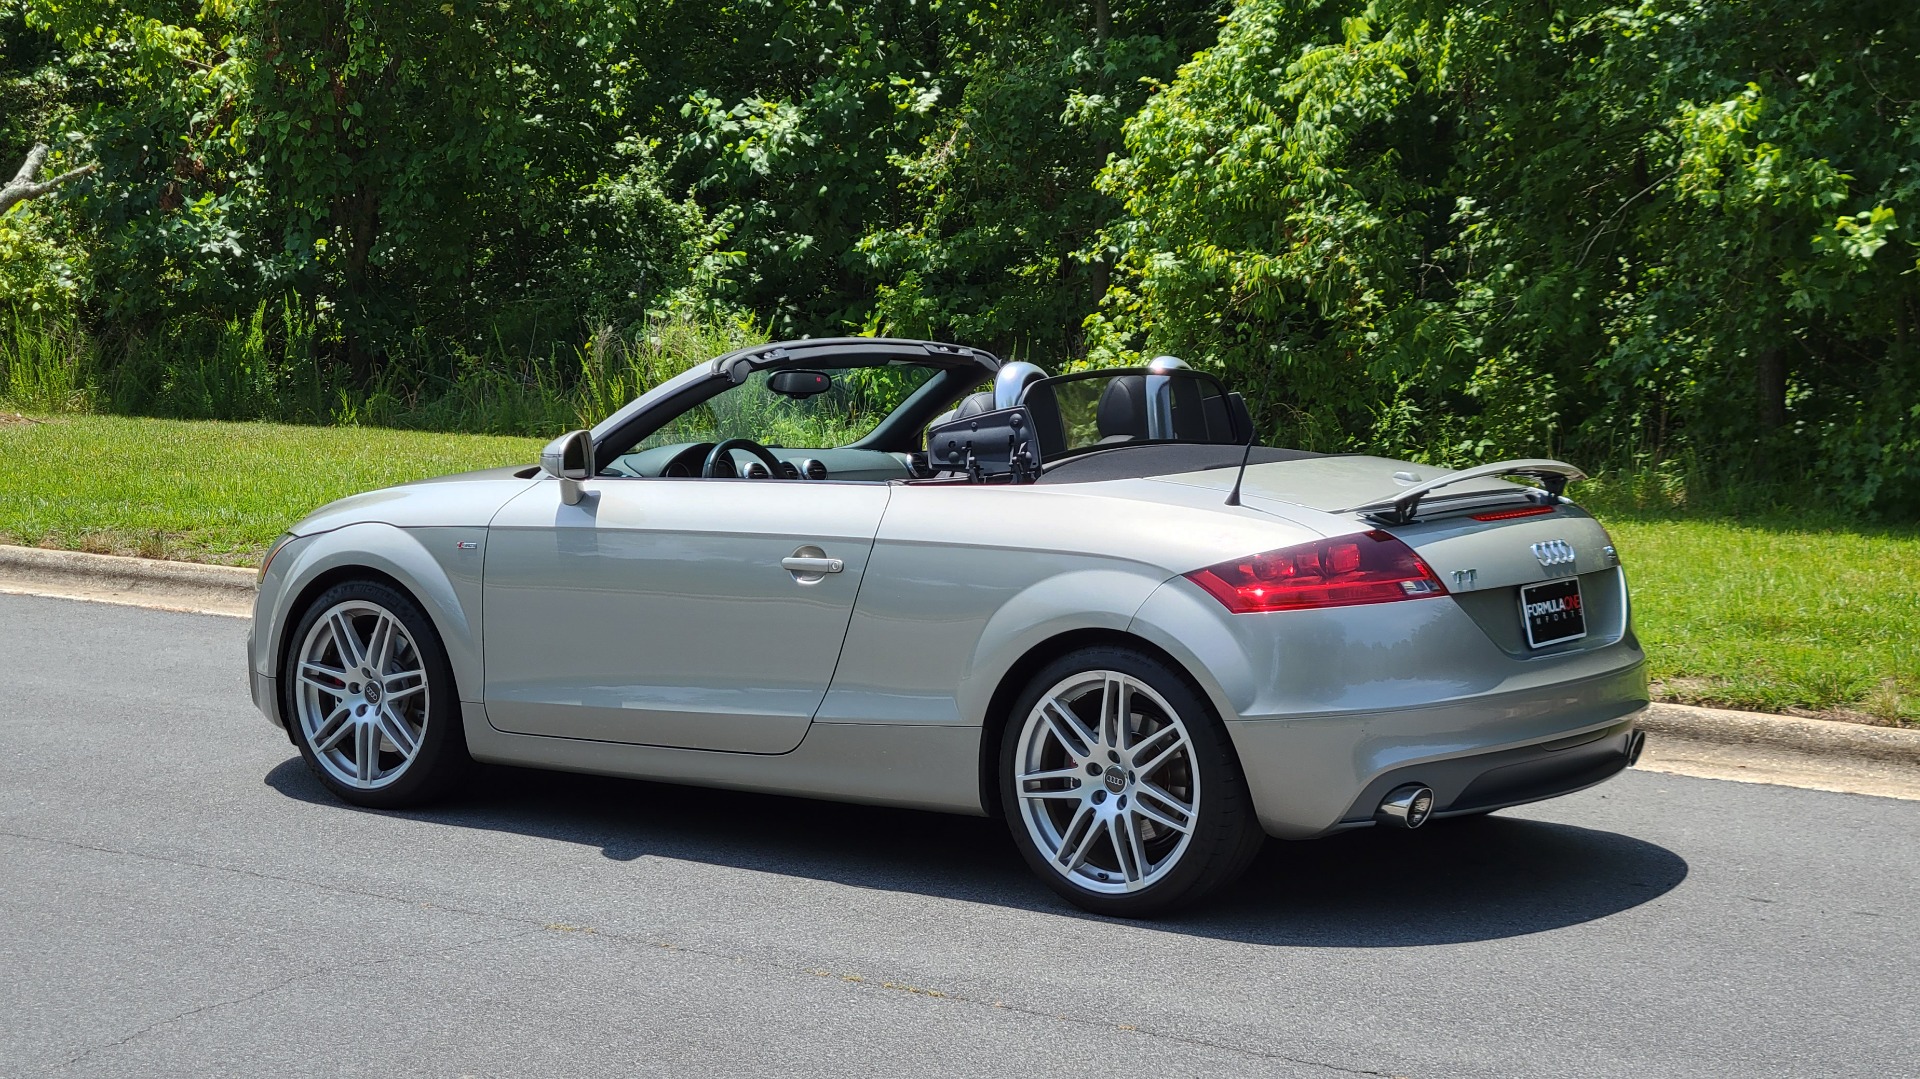 Used 2008 Audi TT 3.2L CONVERTIBLE / MANUAL / 19IN WHEELS / LOW MILES for sale Sold at Formula Imports in Charlotte NC 28227 16